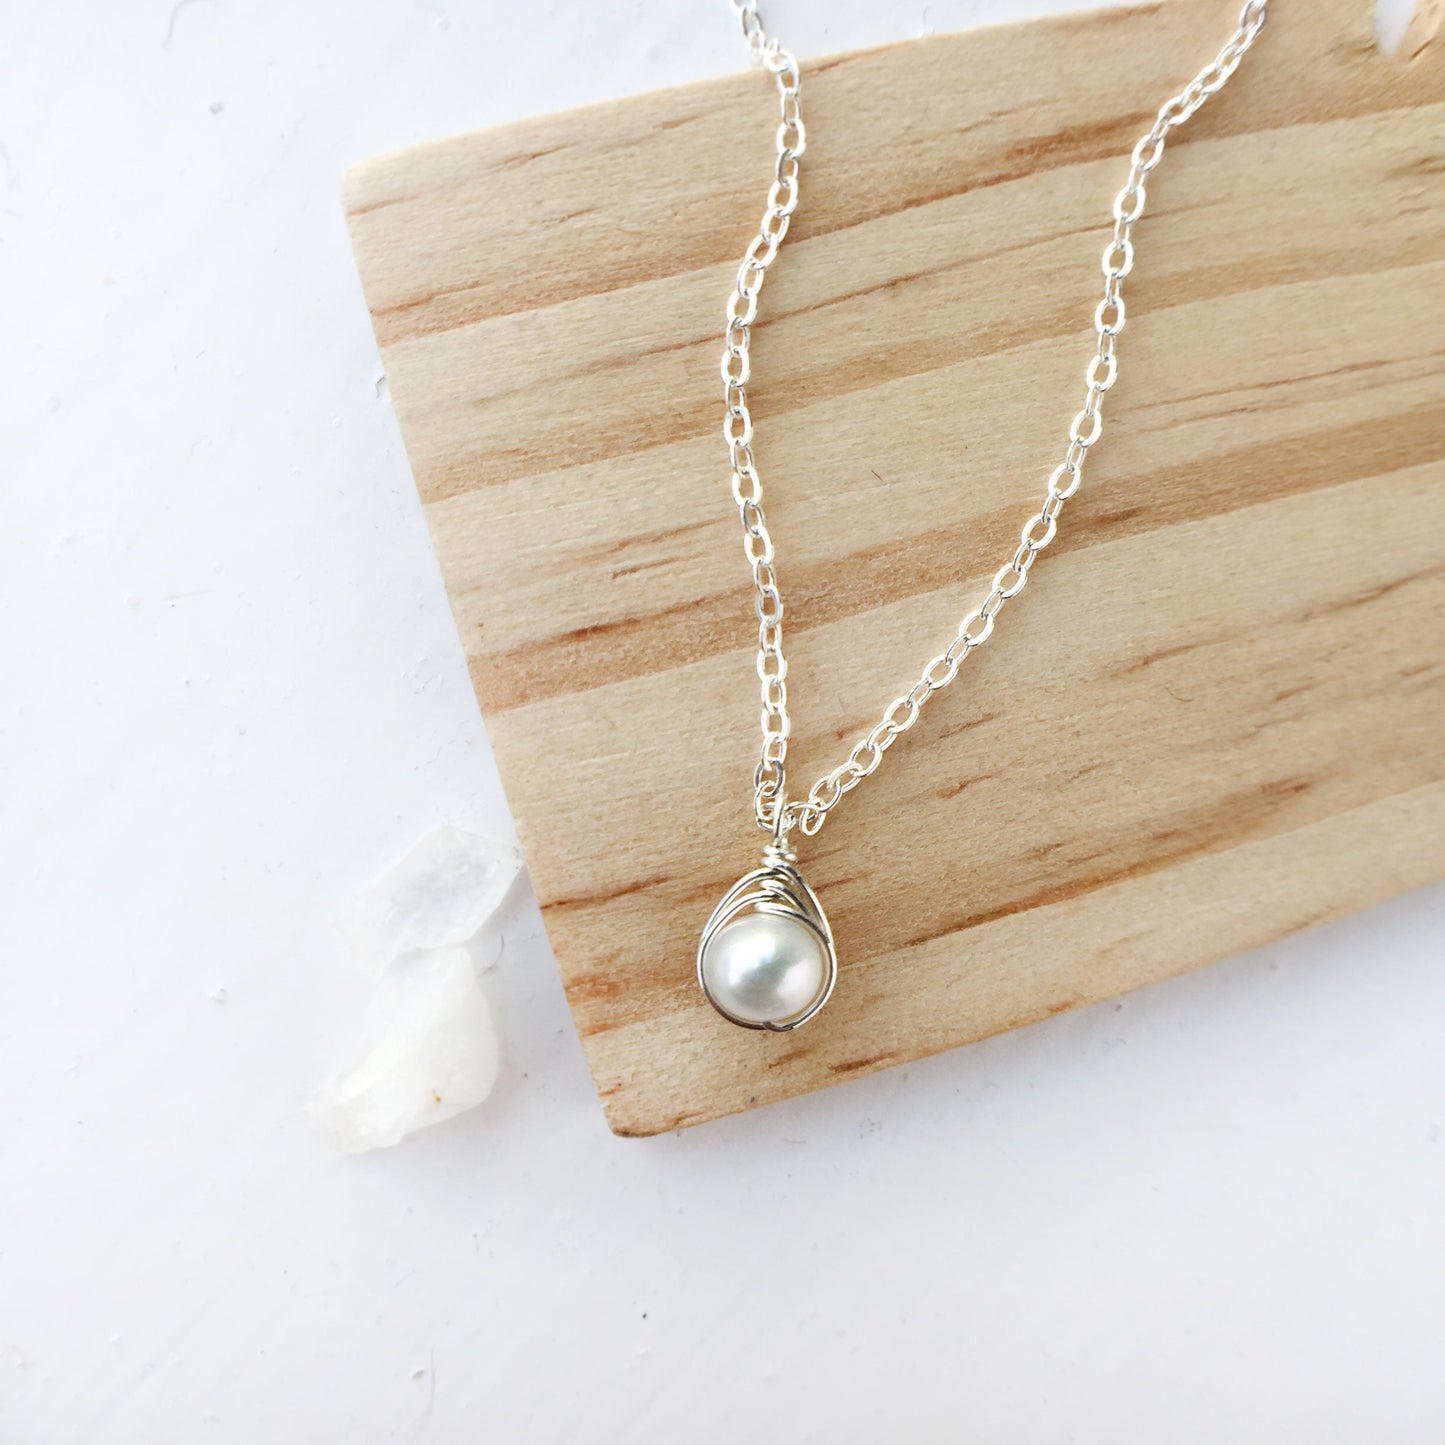 White Pearl Earrings & Necklace Set, Freshwater Pearl Jewelry Set